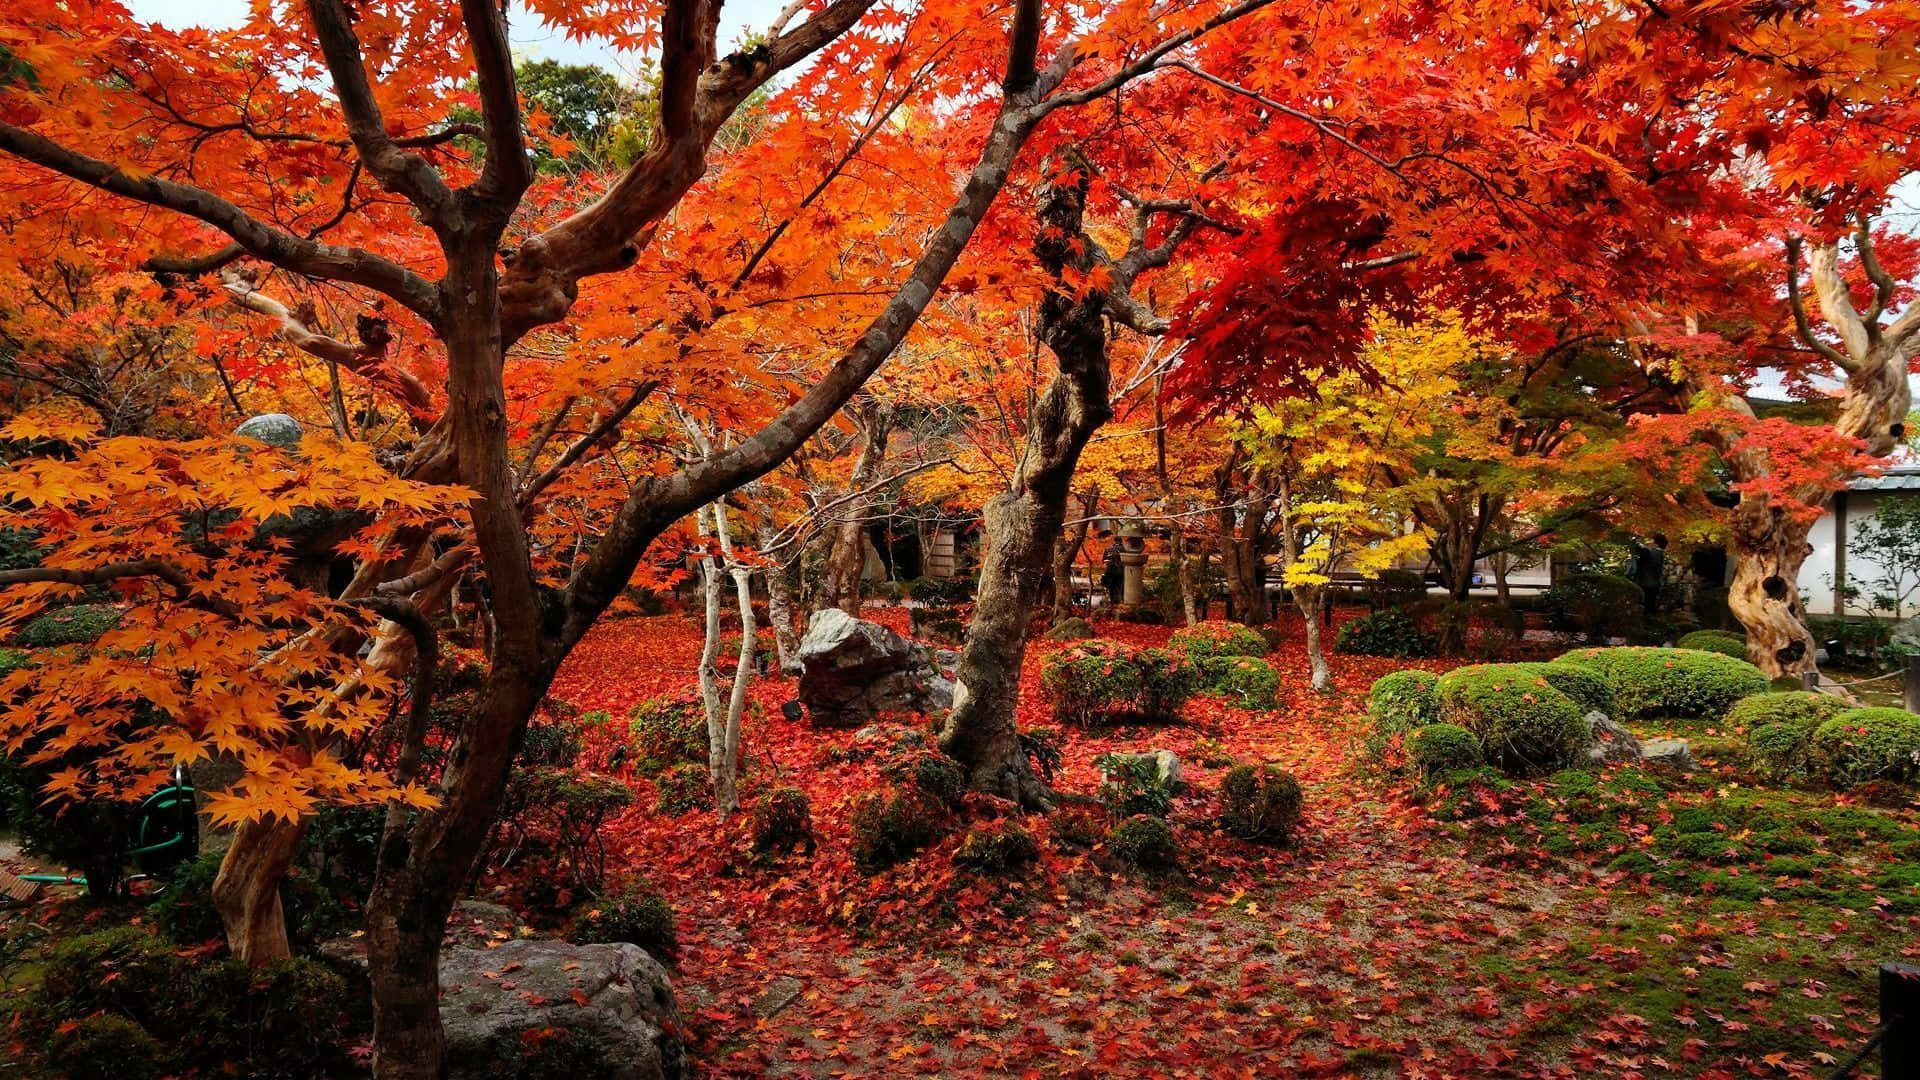 Embrace the beauty of nature in brilliant fall colors. Wallpaper